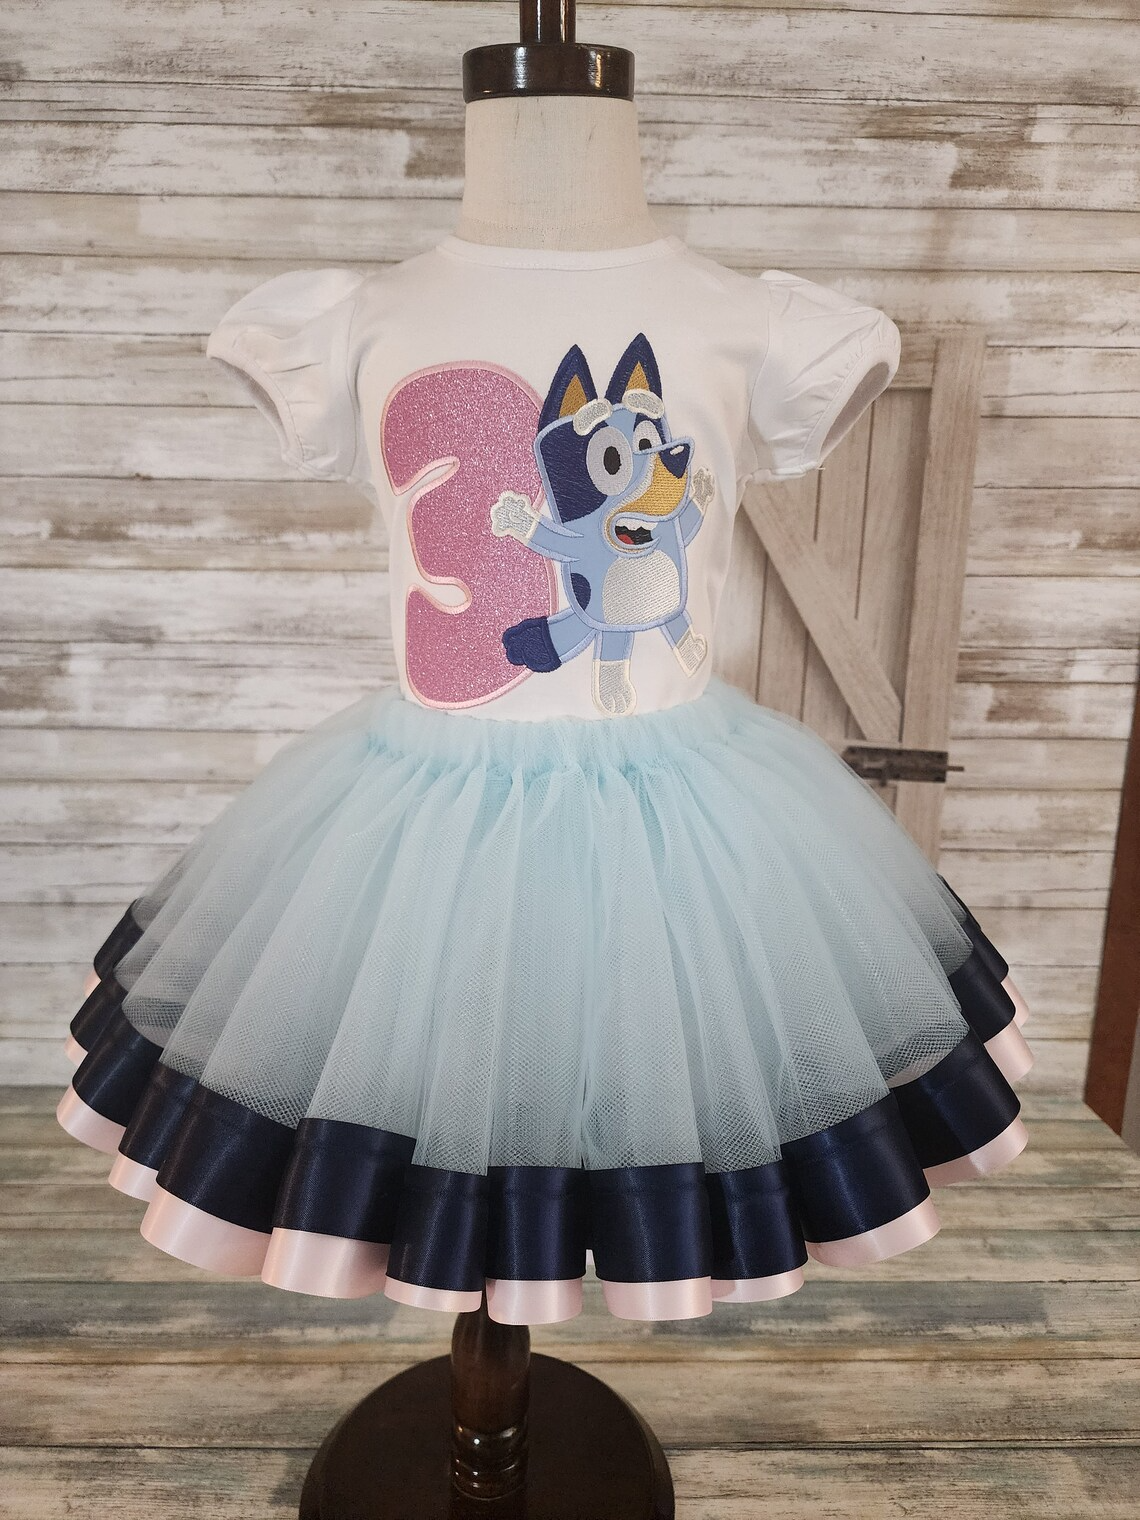 Blue heeler outfit, themed birthday outfit, party outfit, blue dog embroidered top, pink glitter